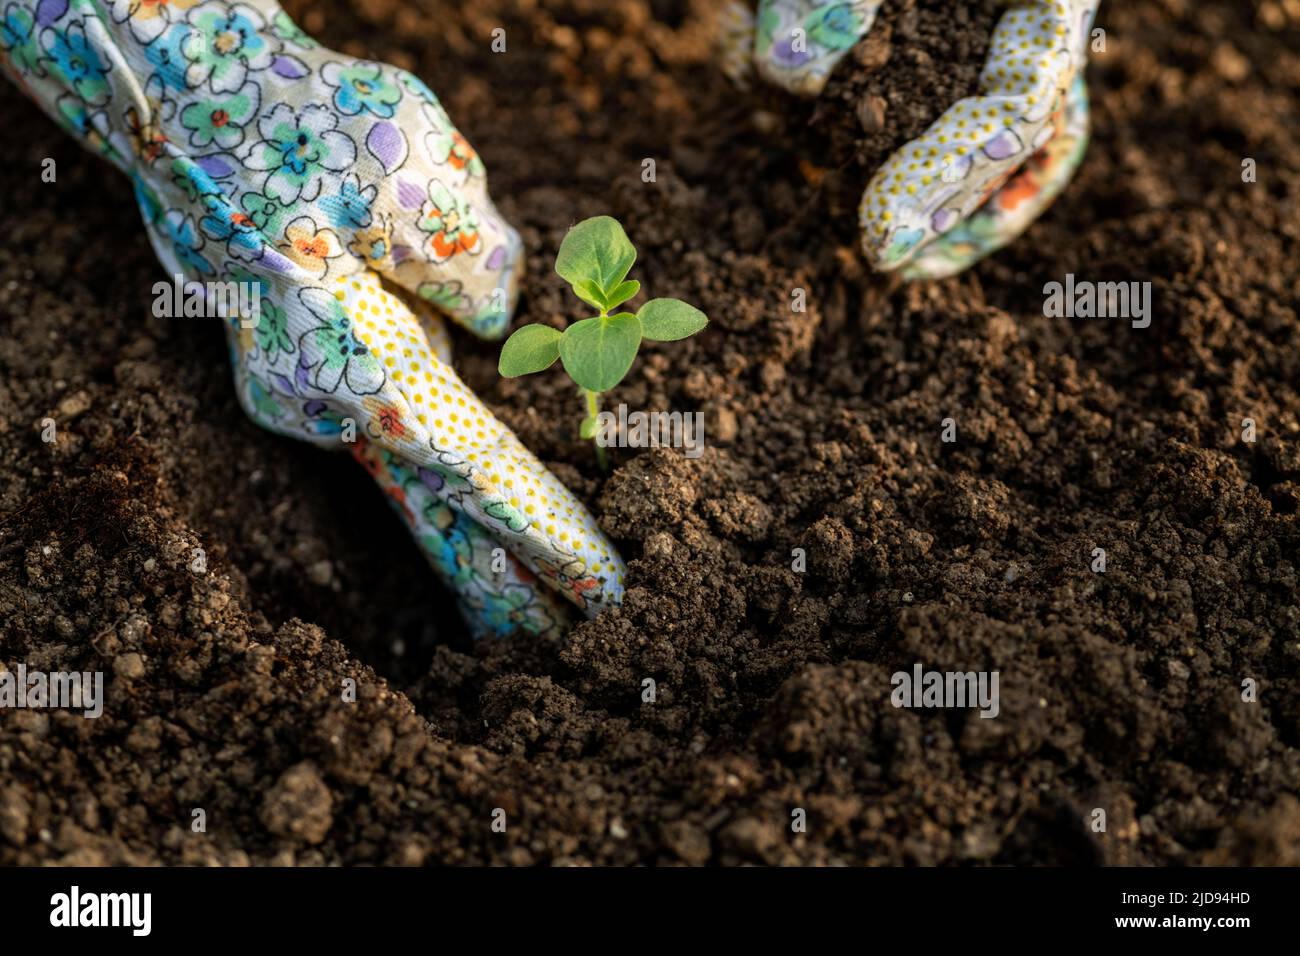 Gardener planting flowers in her flowerbed. Gardening concept. Garden landscaping small business owner. Planting snapdragon seedlings close up shot. Stock Photo